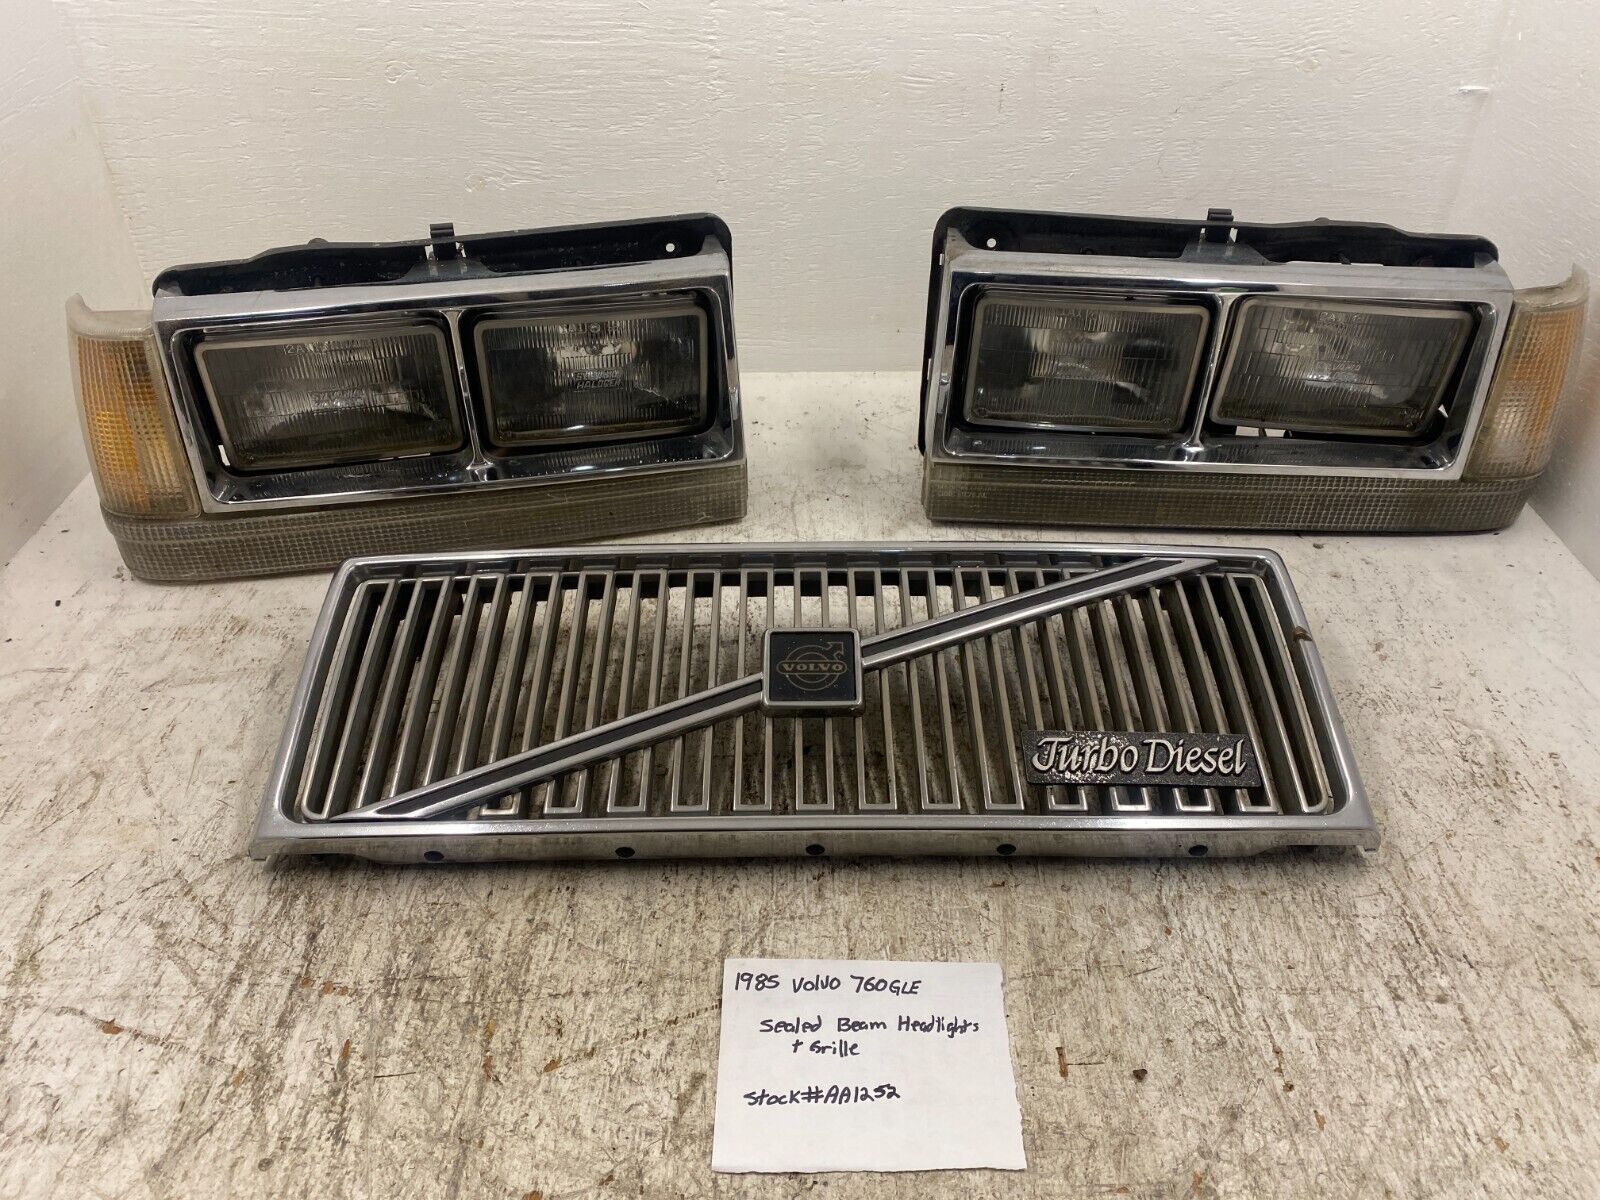 85 VOLVO 760GLE TURBO OEM SEALED BEAM HEADLIGHTS WITH GRILLE GRILL USA